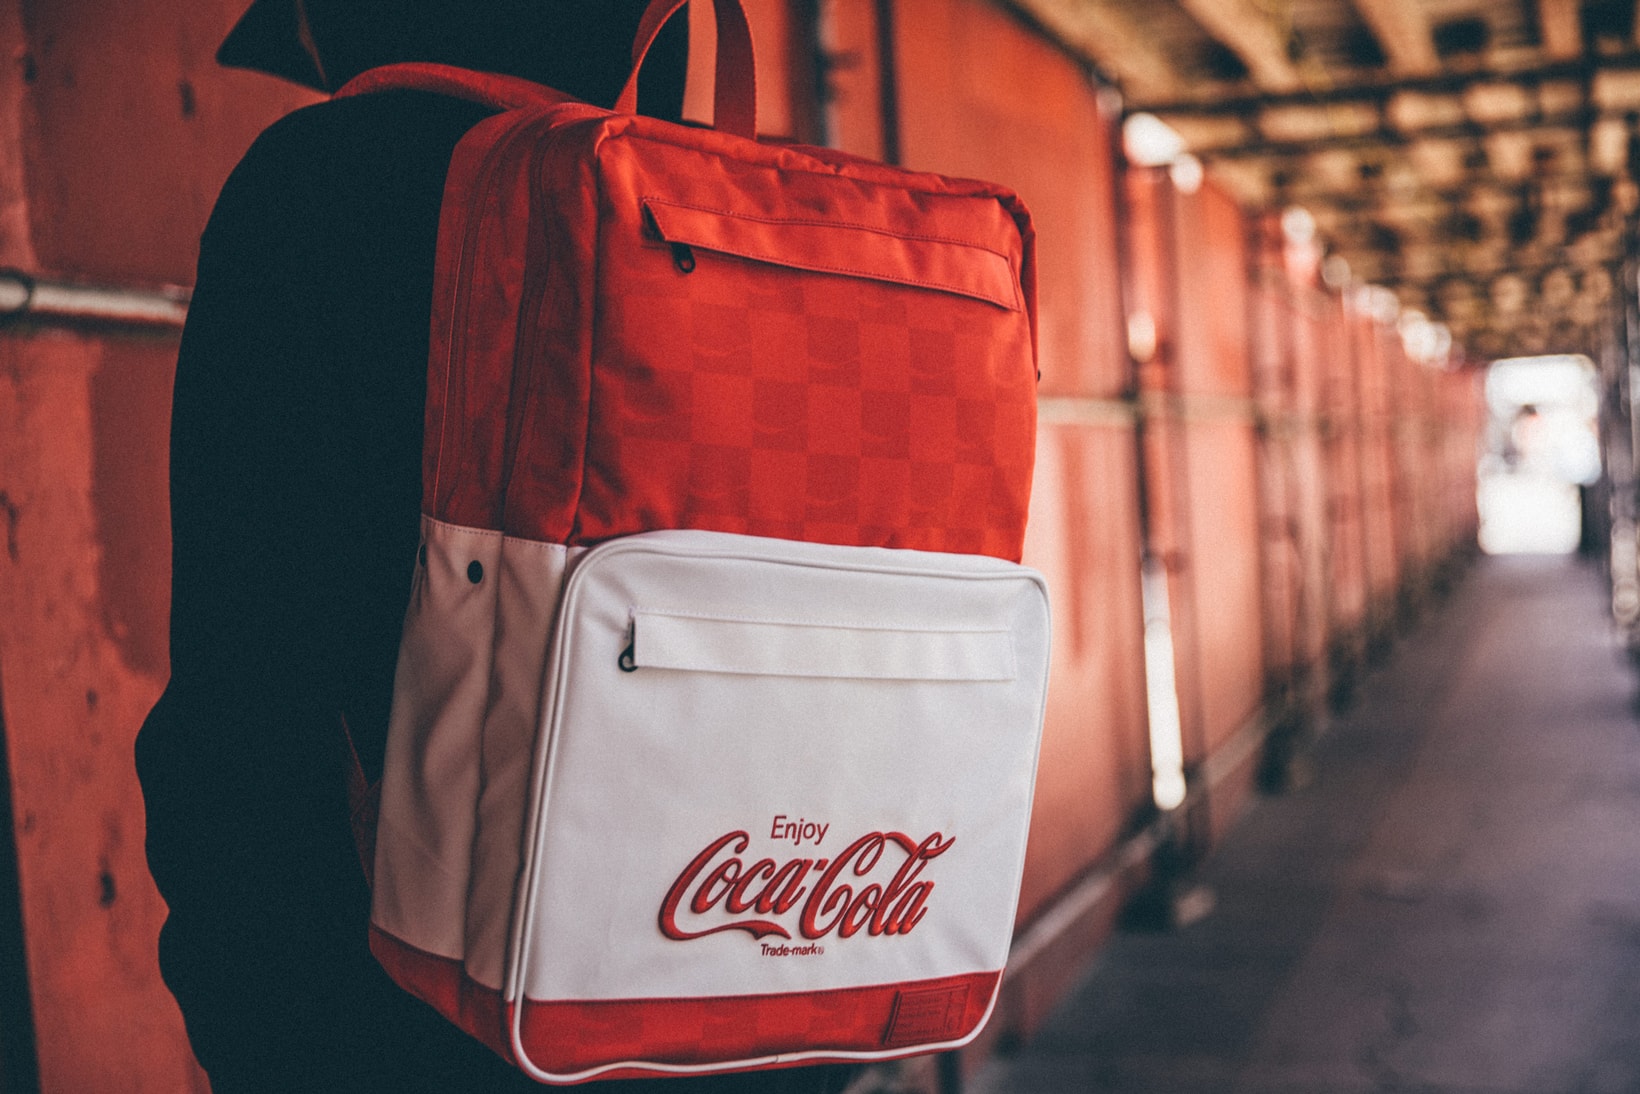 HEX & Coca-Cola Launch Sneaker Bag Collection limited edition holiday gift guide backpack duffle overnight bag fanny pack sling waist bag bum bag